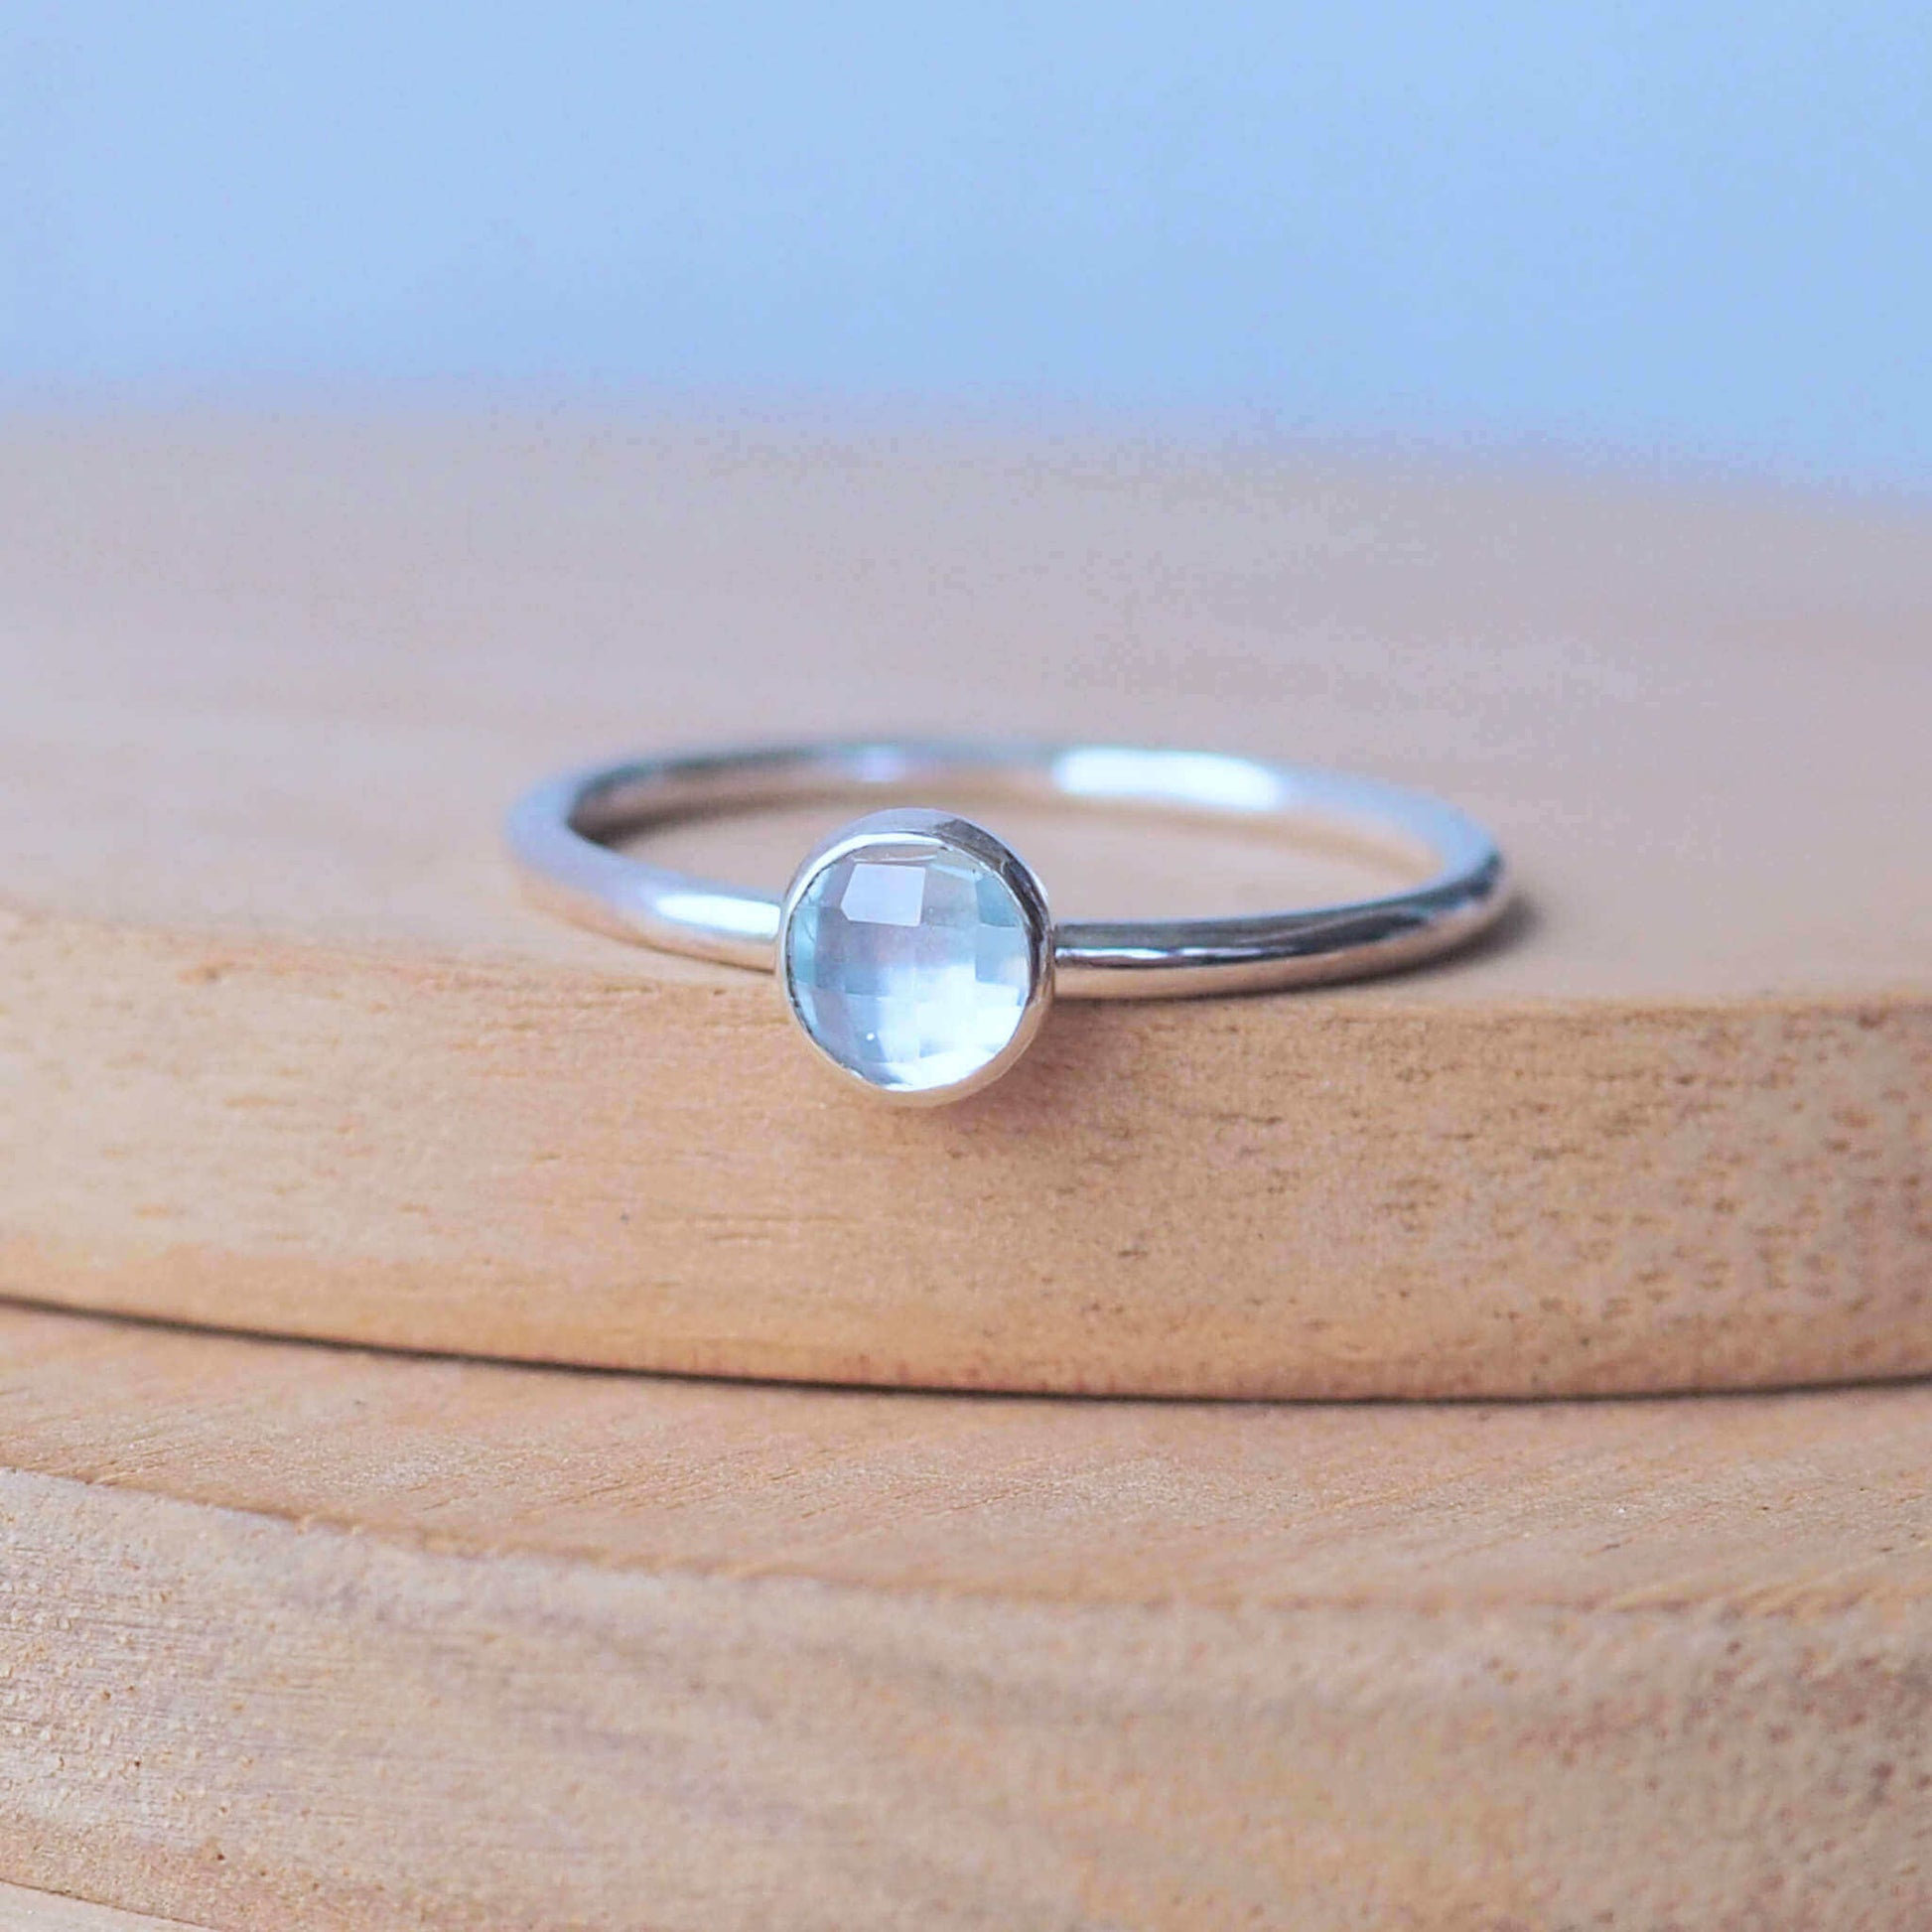 Single solitaire sterling silver ring with a round 5mm pale Blue Topaz. The ring is made in a modern simple style with a 5mm round facet cut cabochon set onto a modern halo fully round band. Made to order to your ring size, and handmade in scotland by maram jewellery